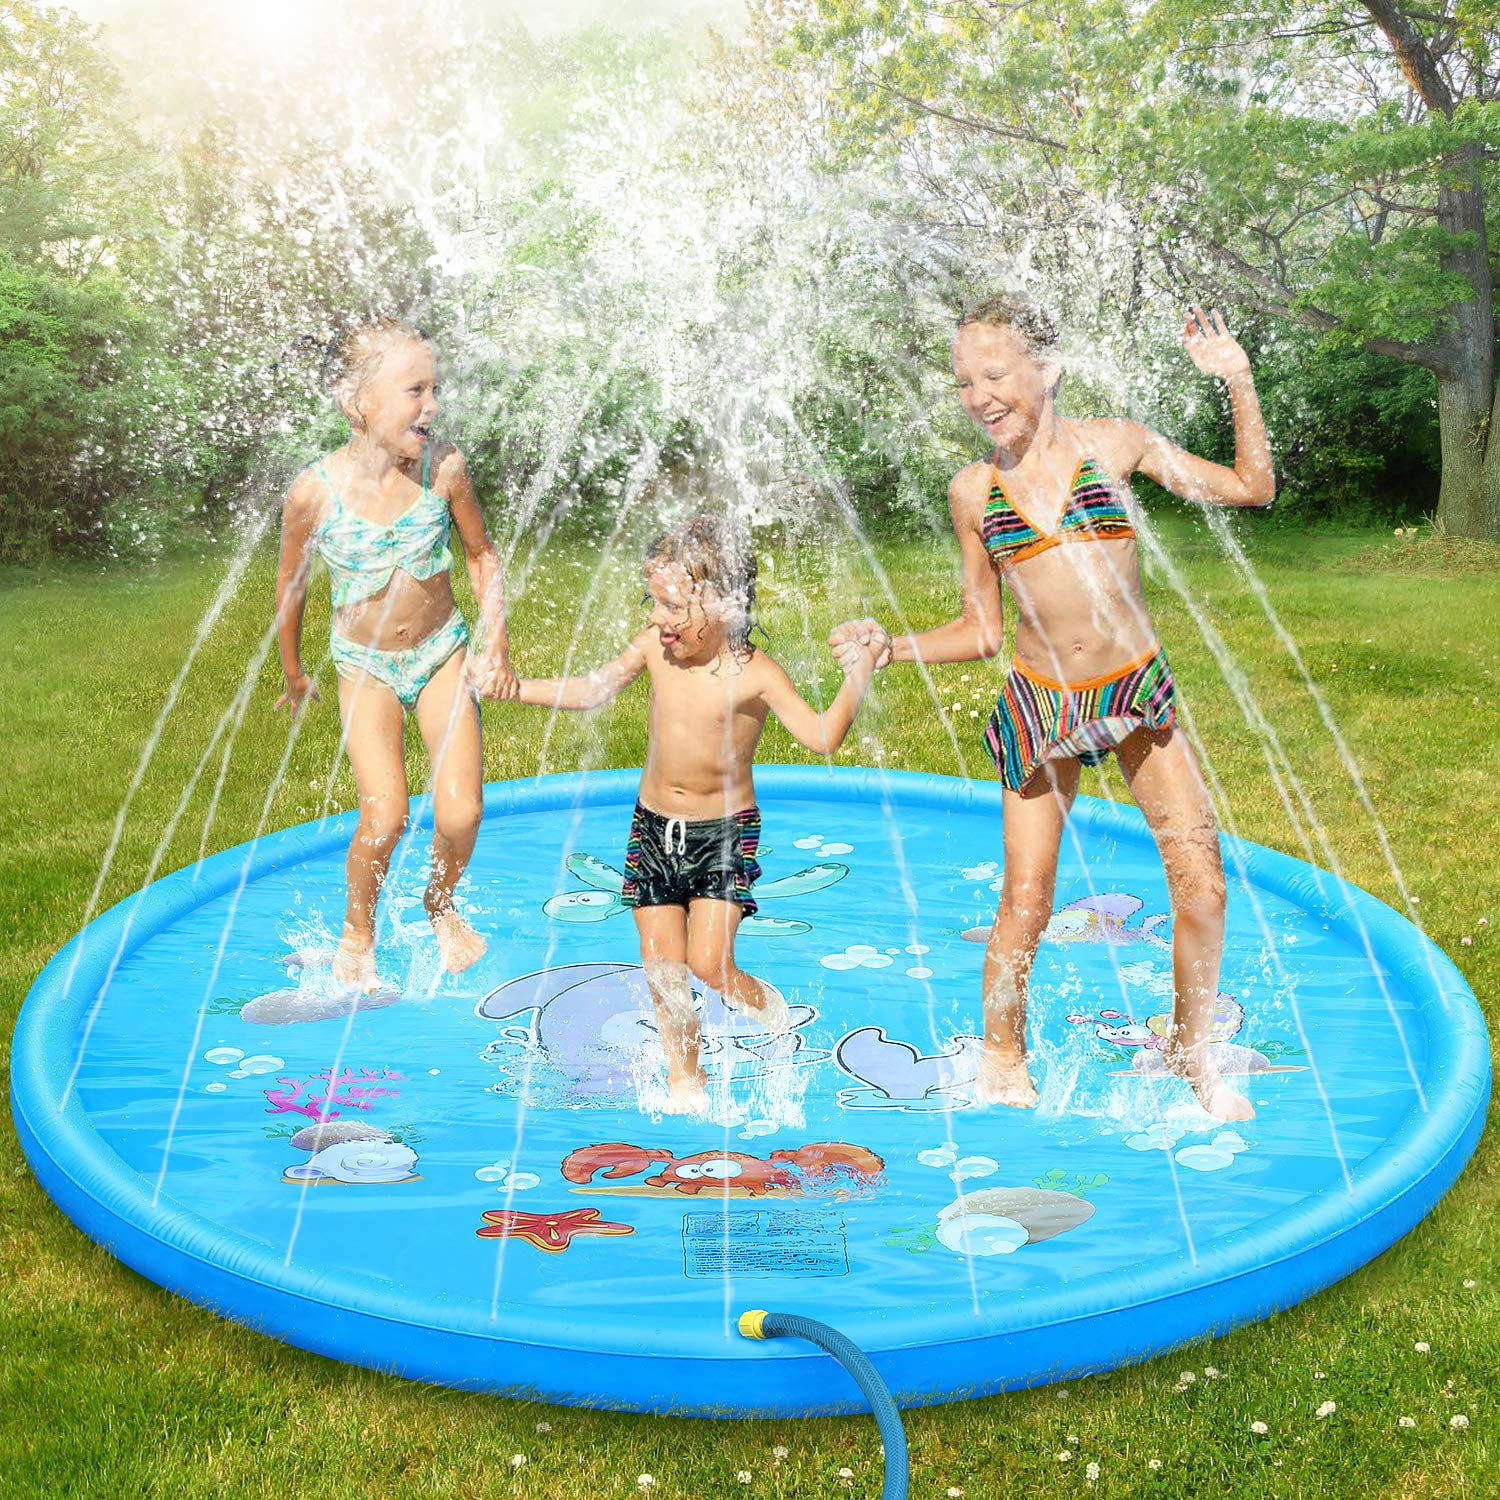 XJZ Splash Pad Whale Sprinkler Play Mat Inflatable Pool Pad Summer Outdoor Party Garden Beach Water Toys for Kids Children 180CM 